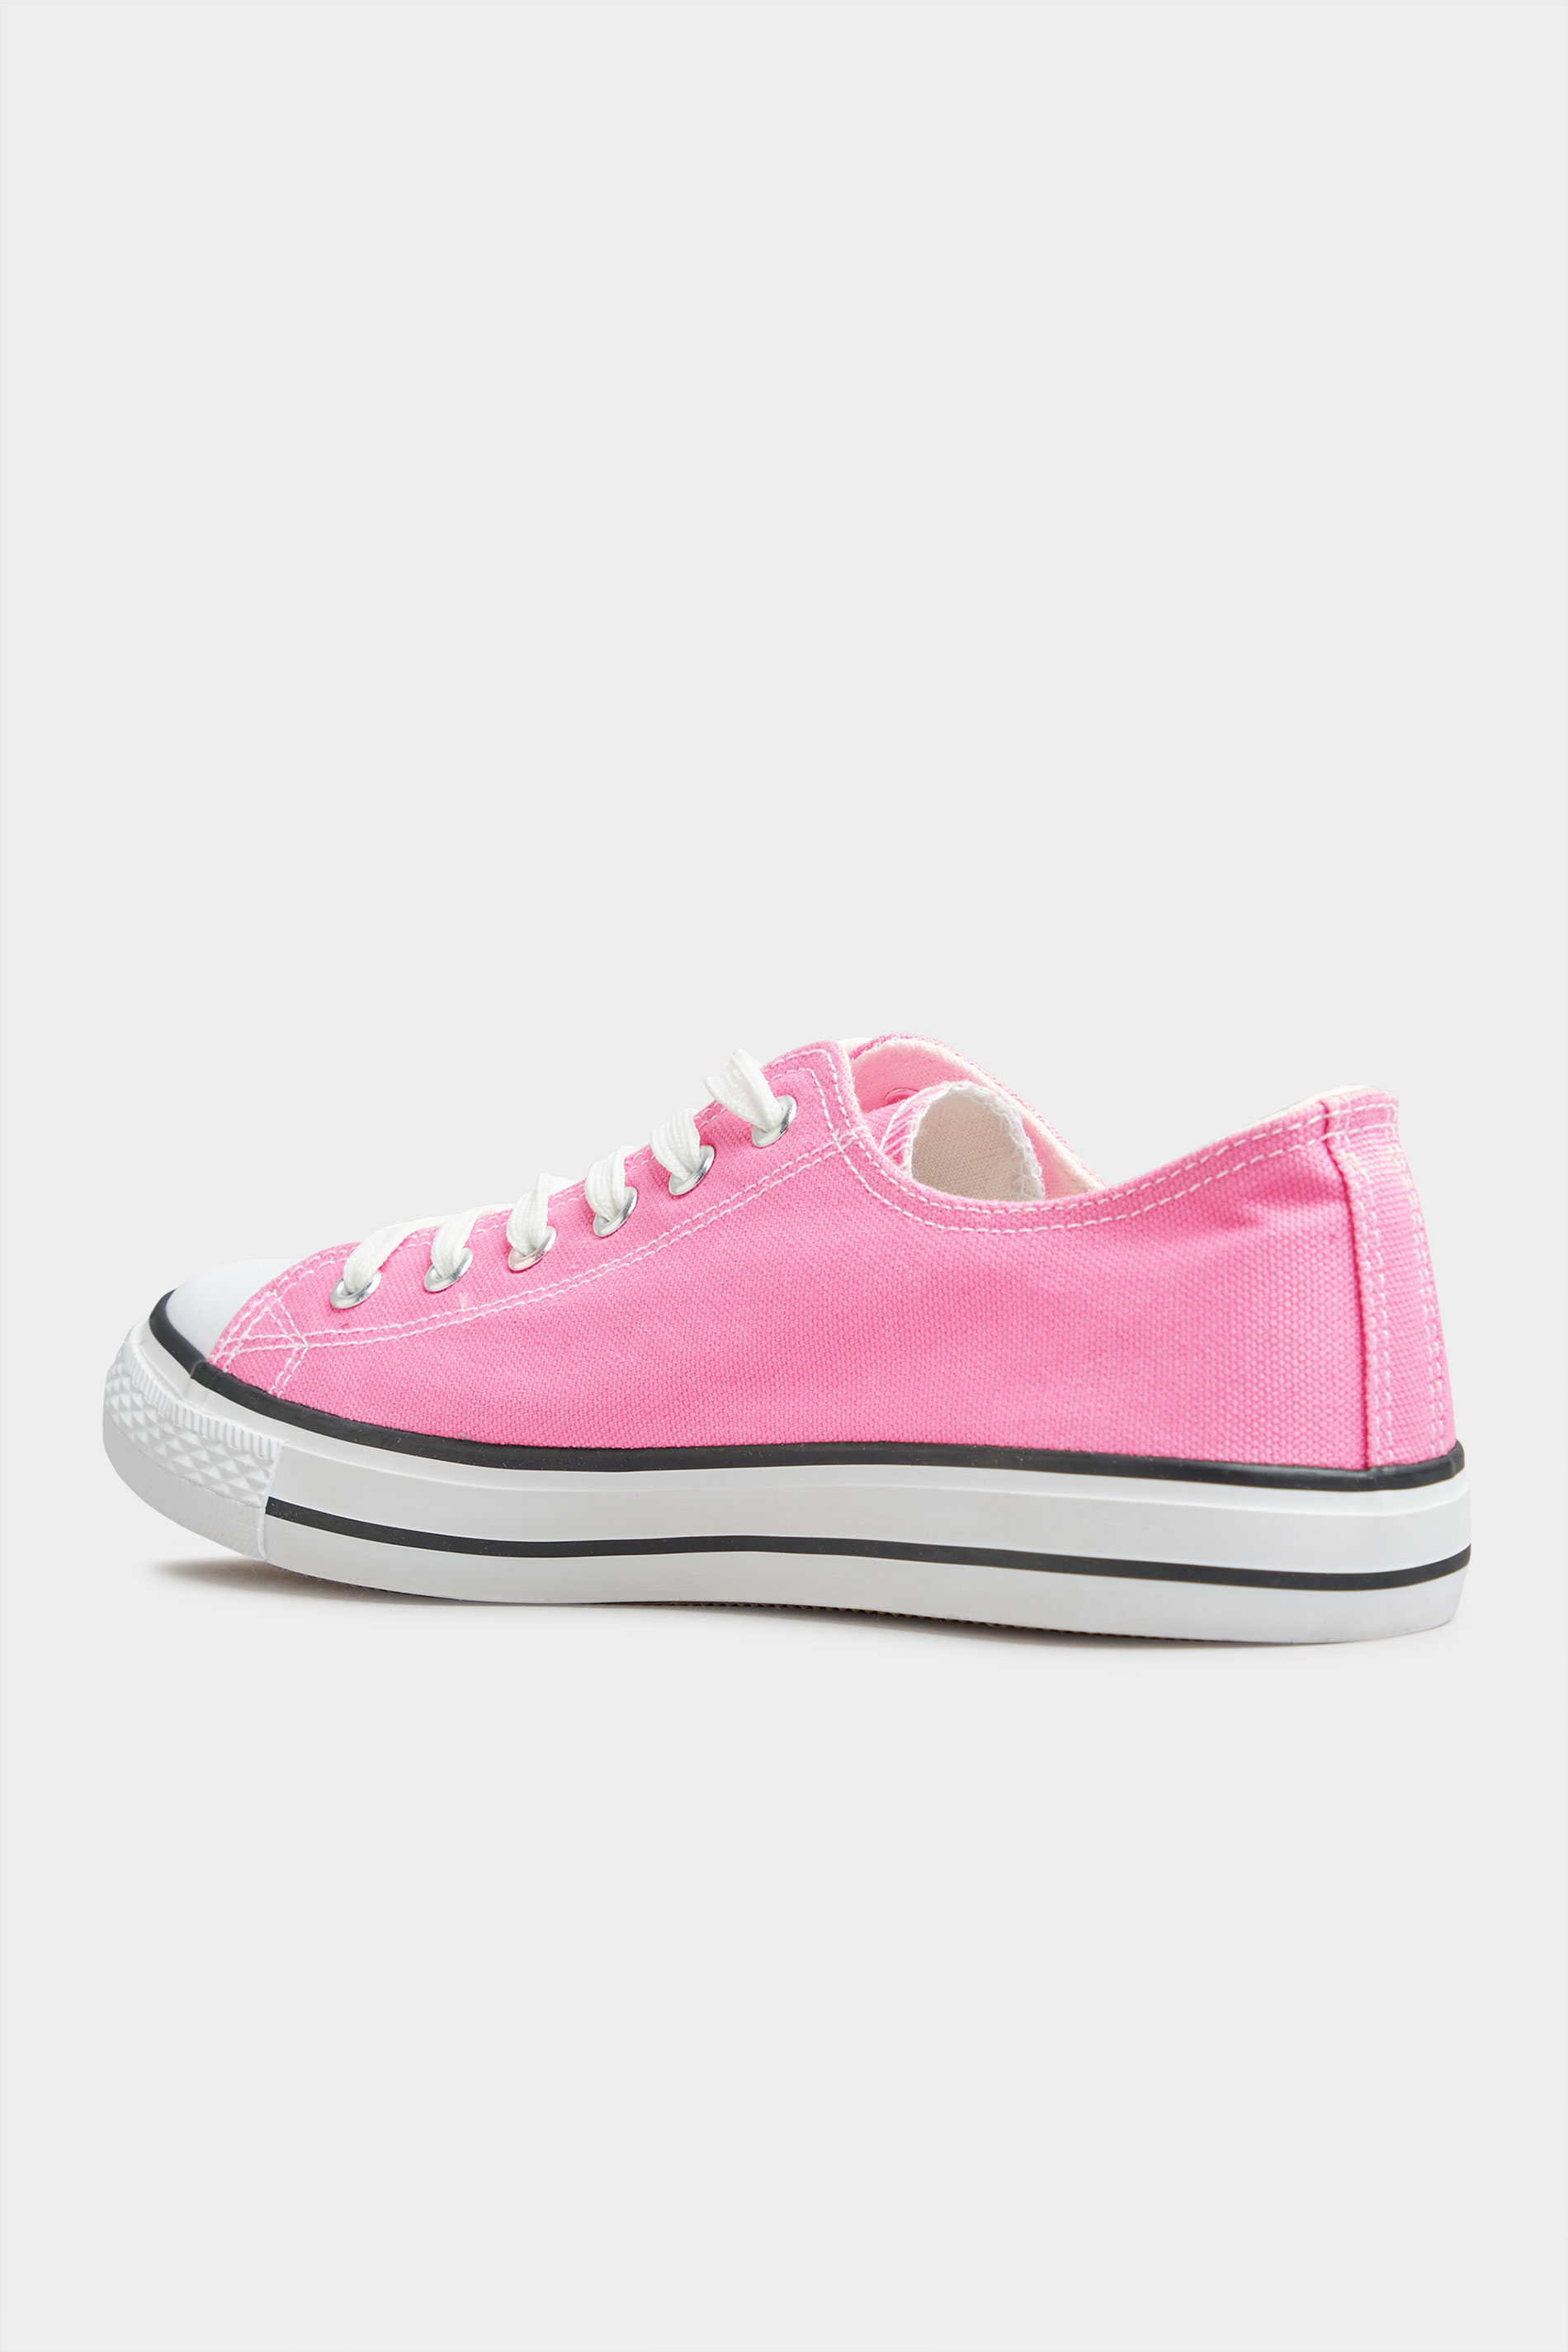 Chaussures Pieds Larges Tennis & Baskets Pieds Larges | Tennis Roses Pieds Larges - GK64851